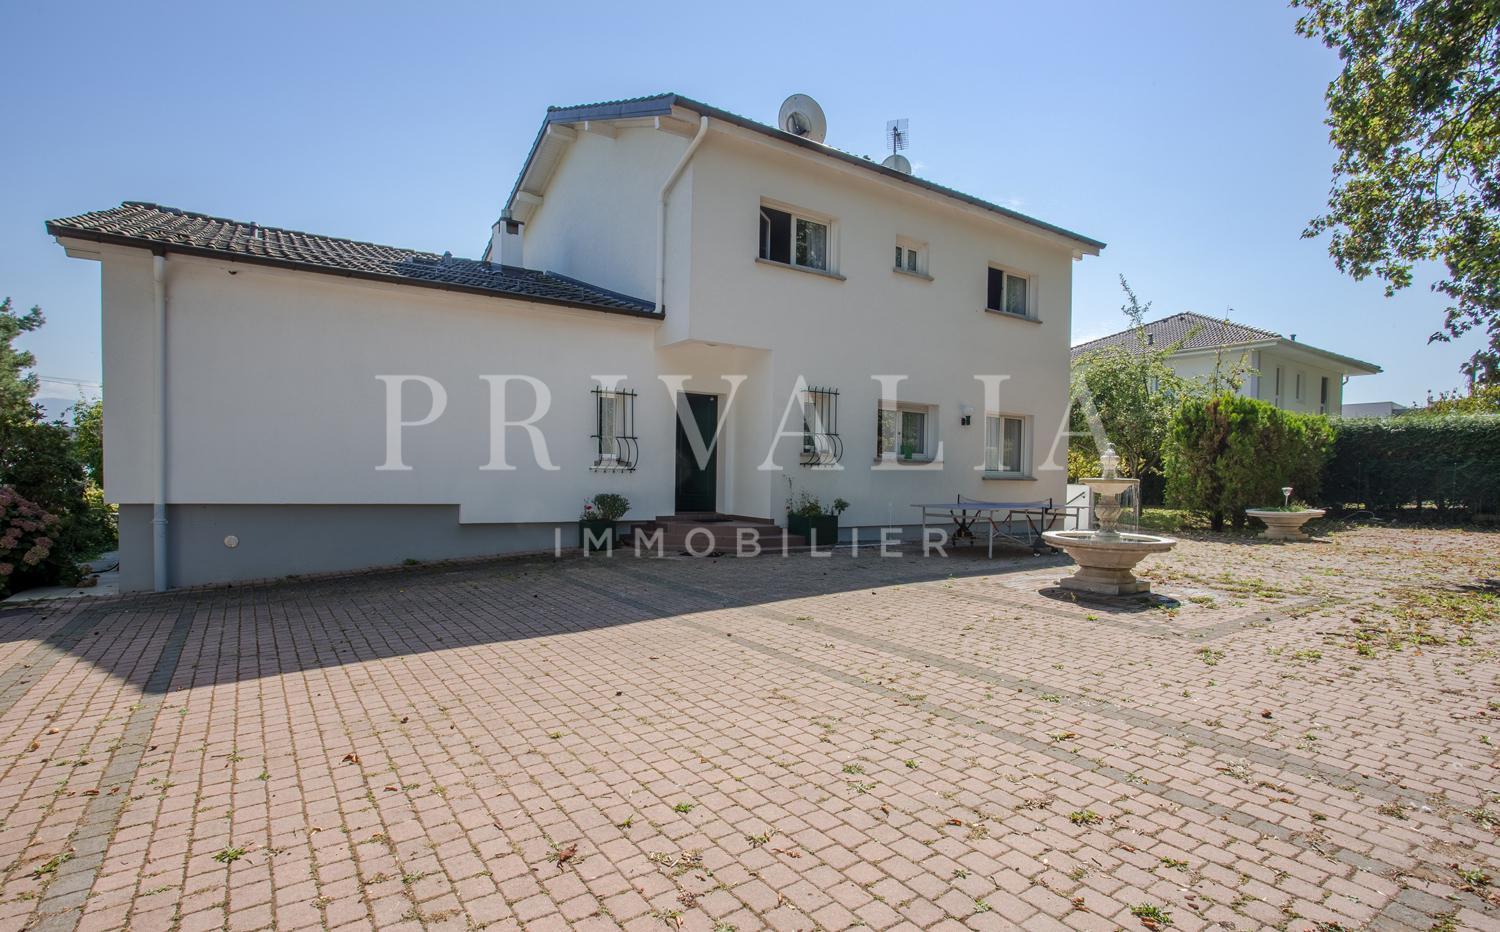 PrivaliaIndividual property with swimming pool, on a plot of about 1’300 m2